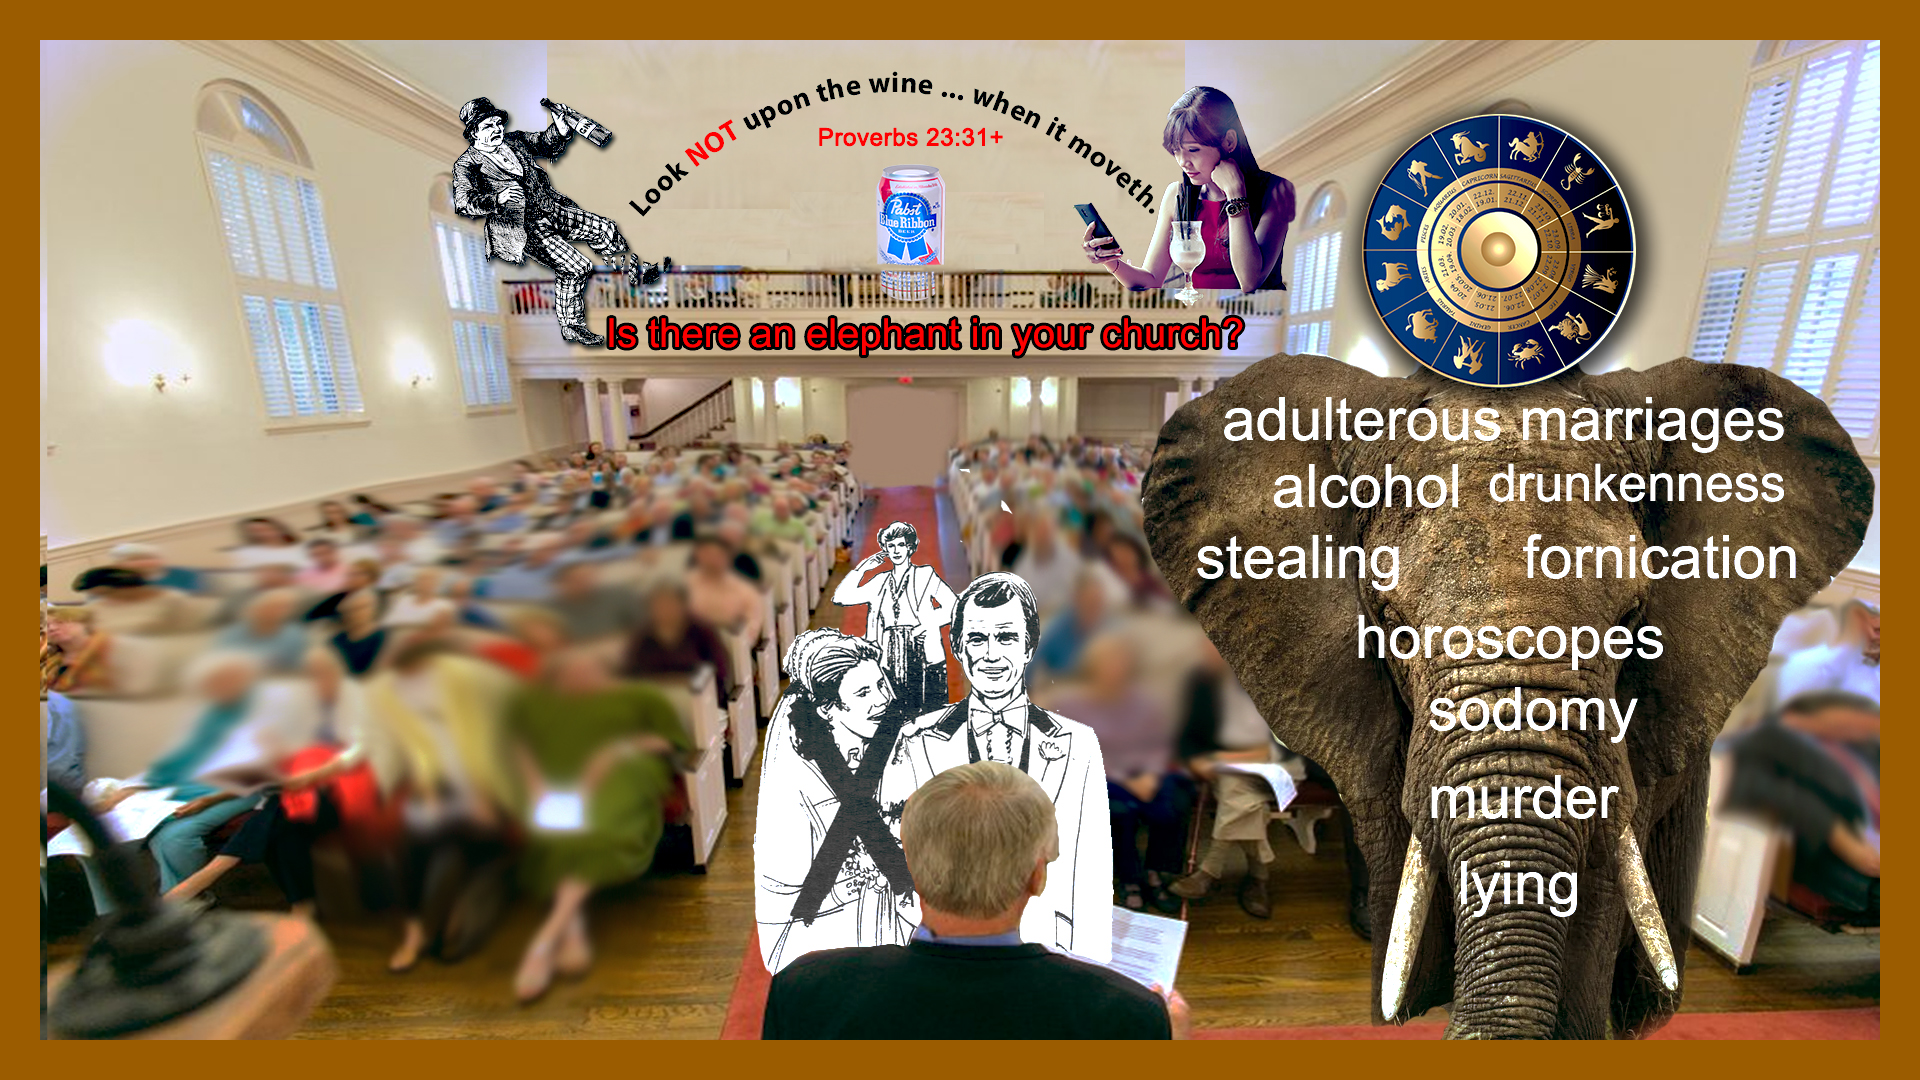 Church congregation with adulterous marriage coming before pastor; people drinking alcohol in balcony, an elphant up front with sins written on him and horoscope disk above the elephant's head